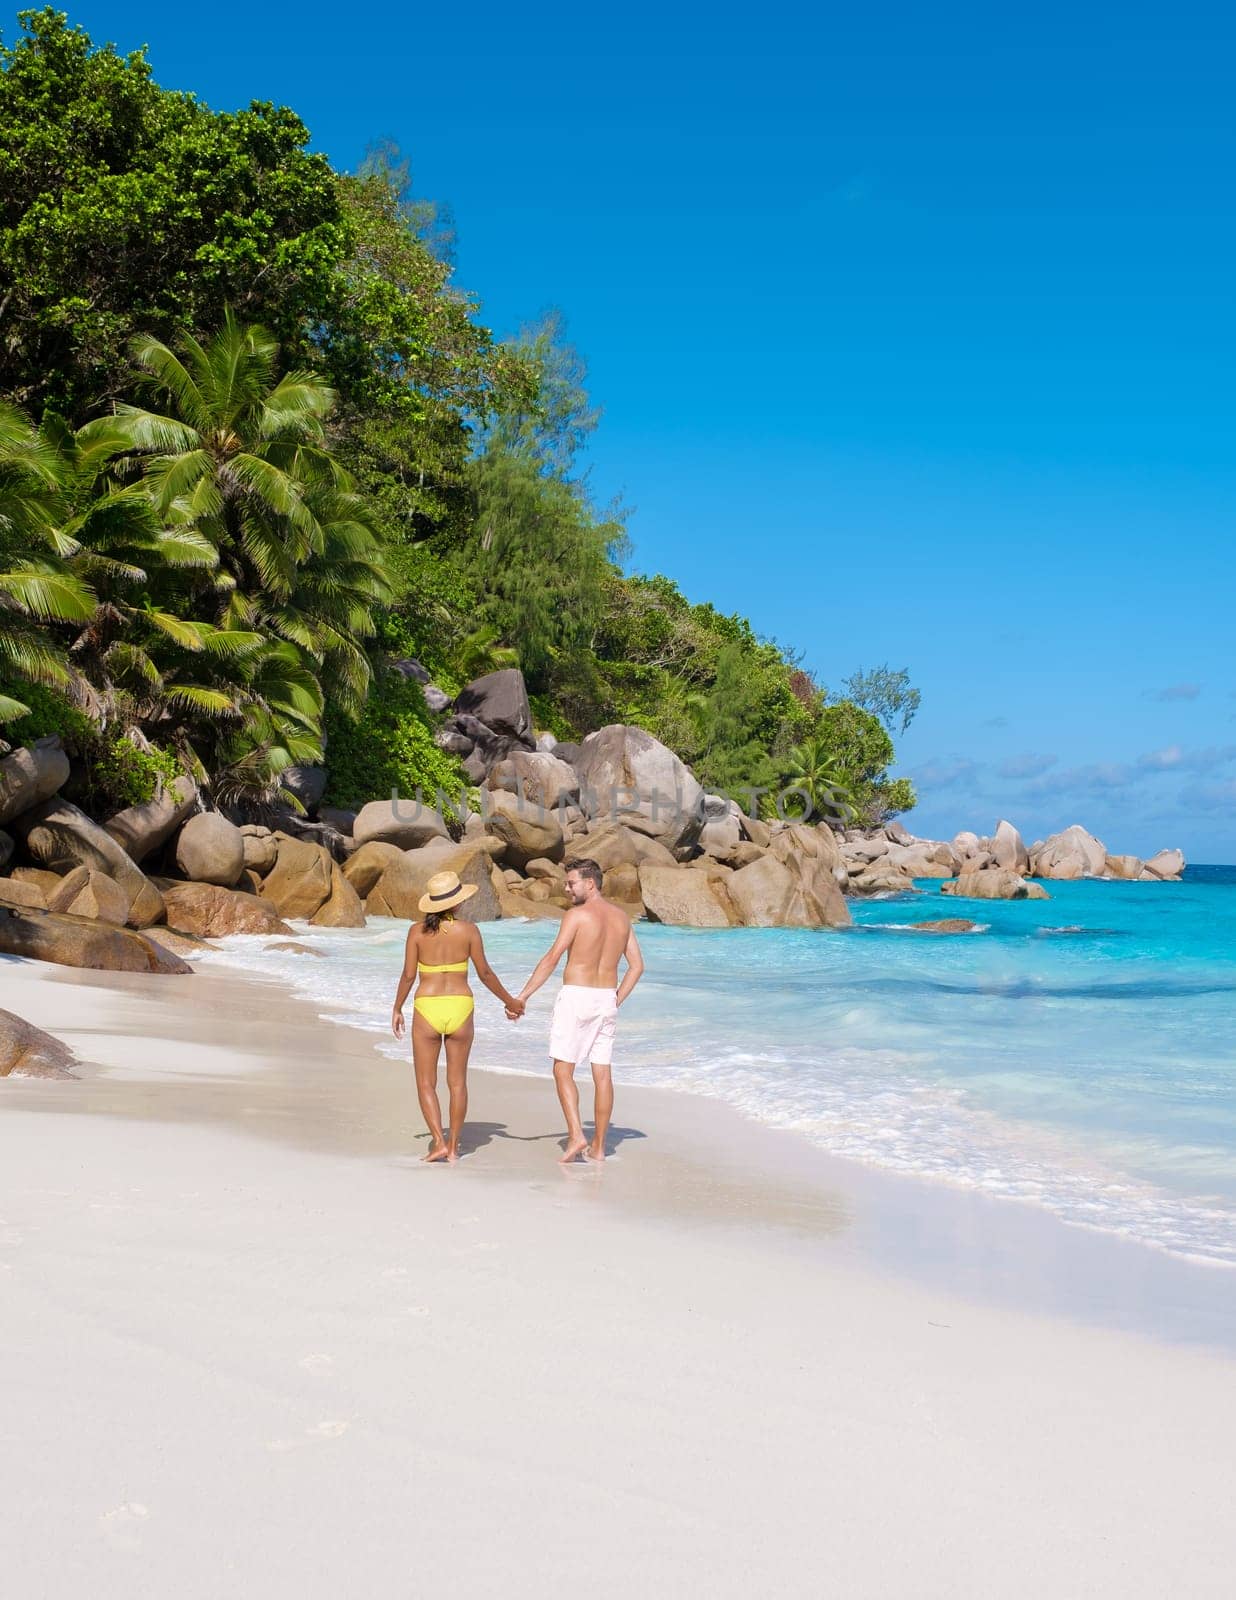 Anse Lazio Praslin Seychelles, a young couple of men and women on a tropical beach during a luxury vacation at the Seychelles. Tropical beach Anse Lazio Praslin Seychelles Islands